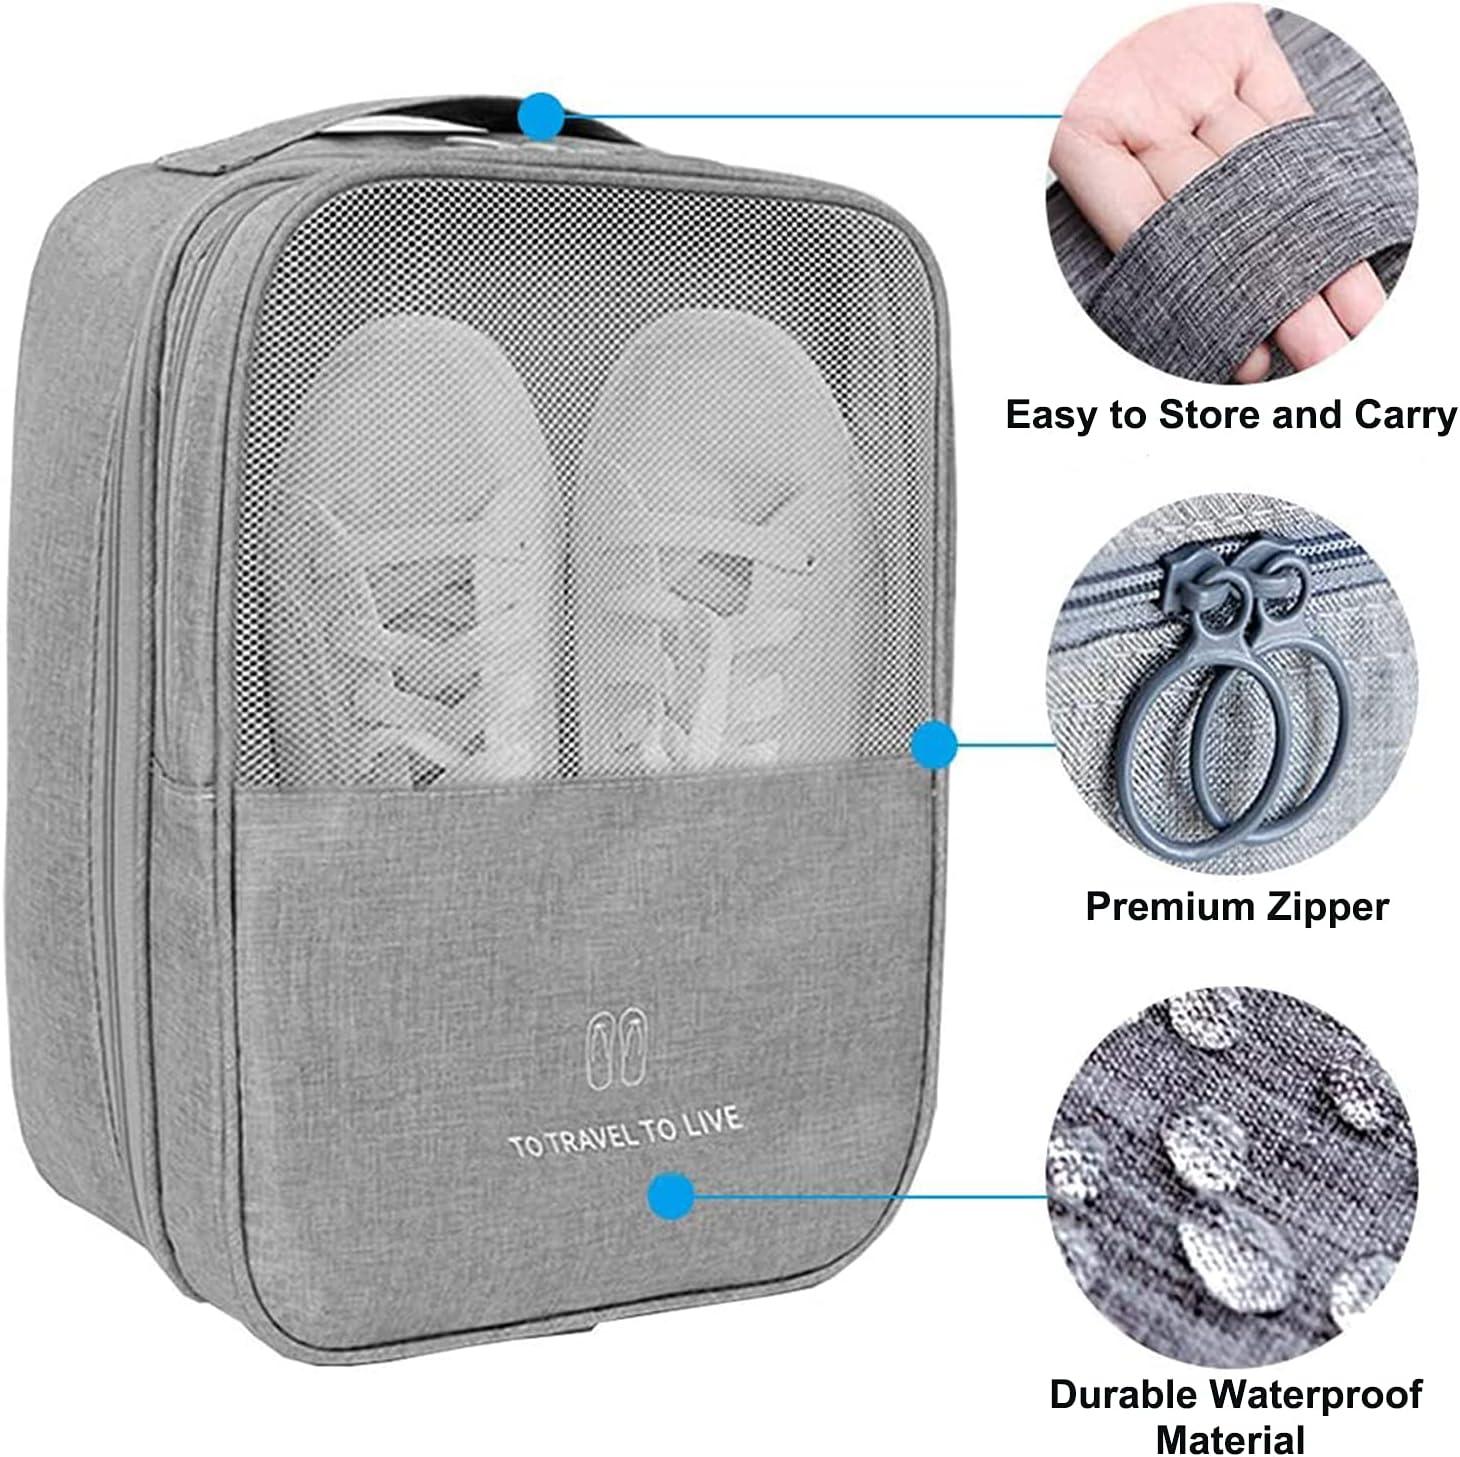 Goory Shoes Storage Bag Holds 3 Pair of Shoes Shoe Bags with Zipper for  Travel and Daily Use 